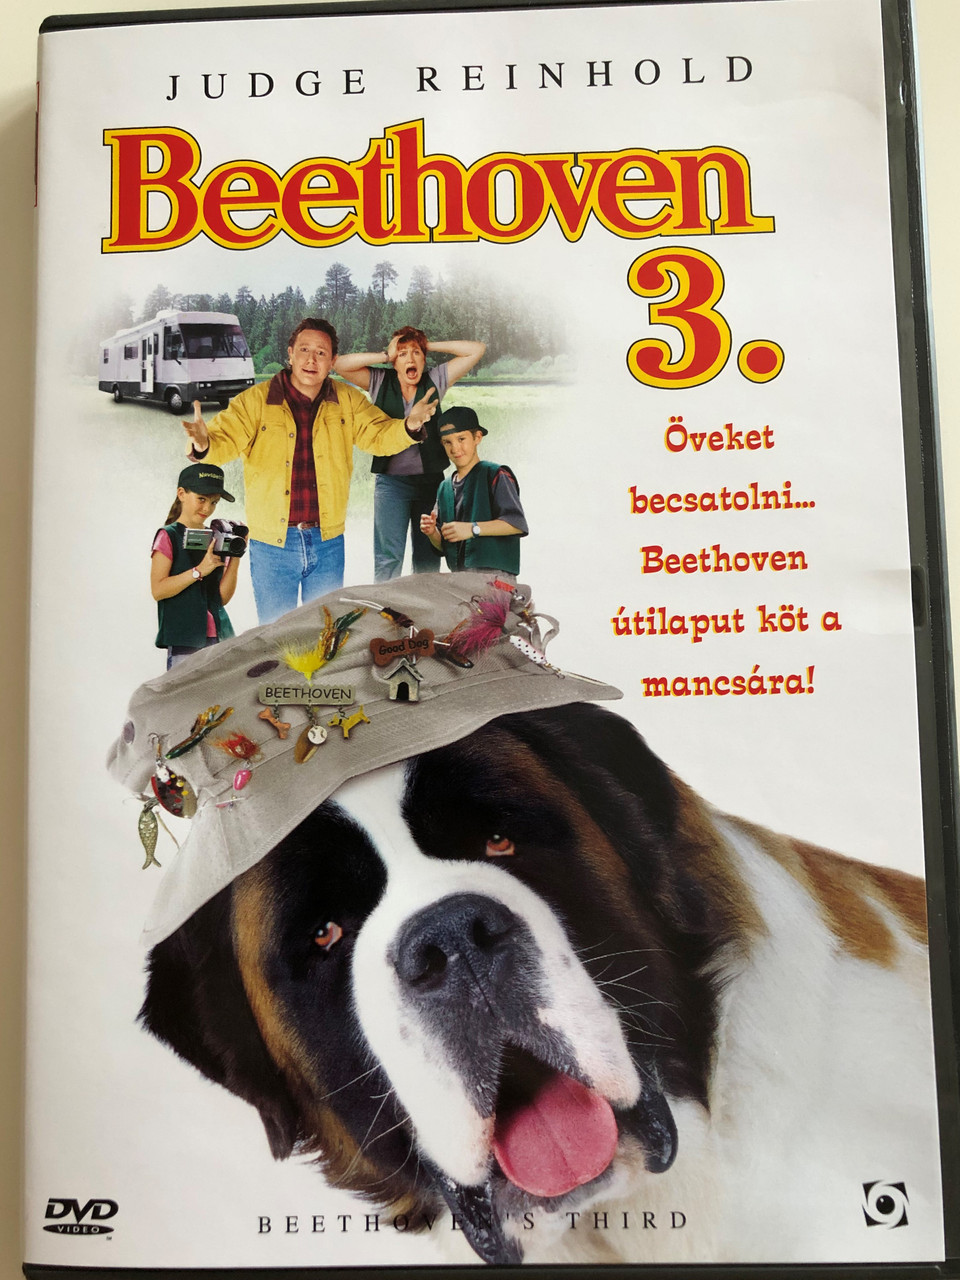 2000 Beethoven's 3rd